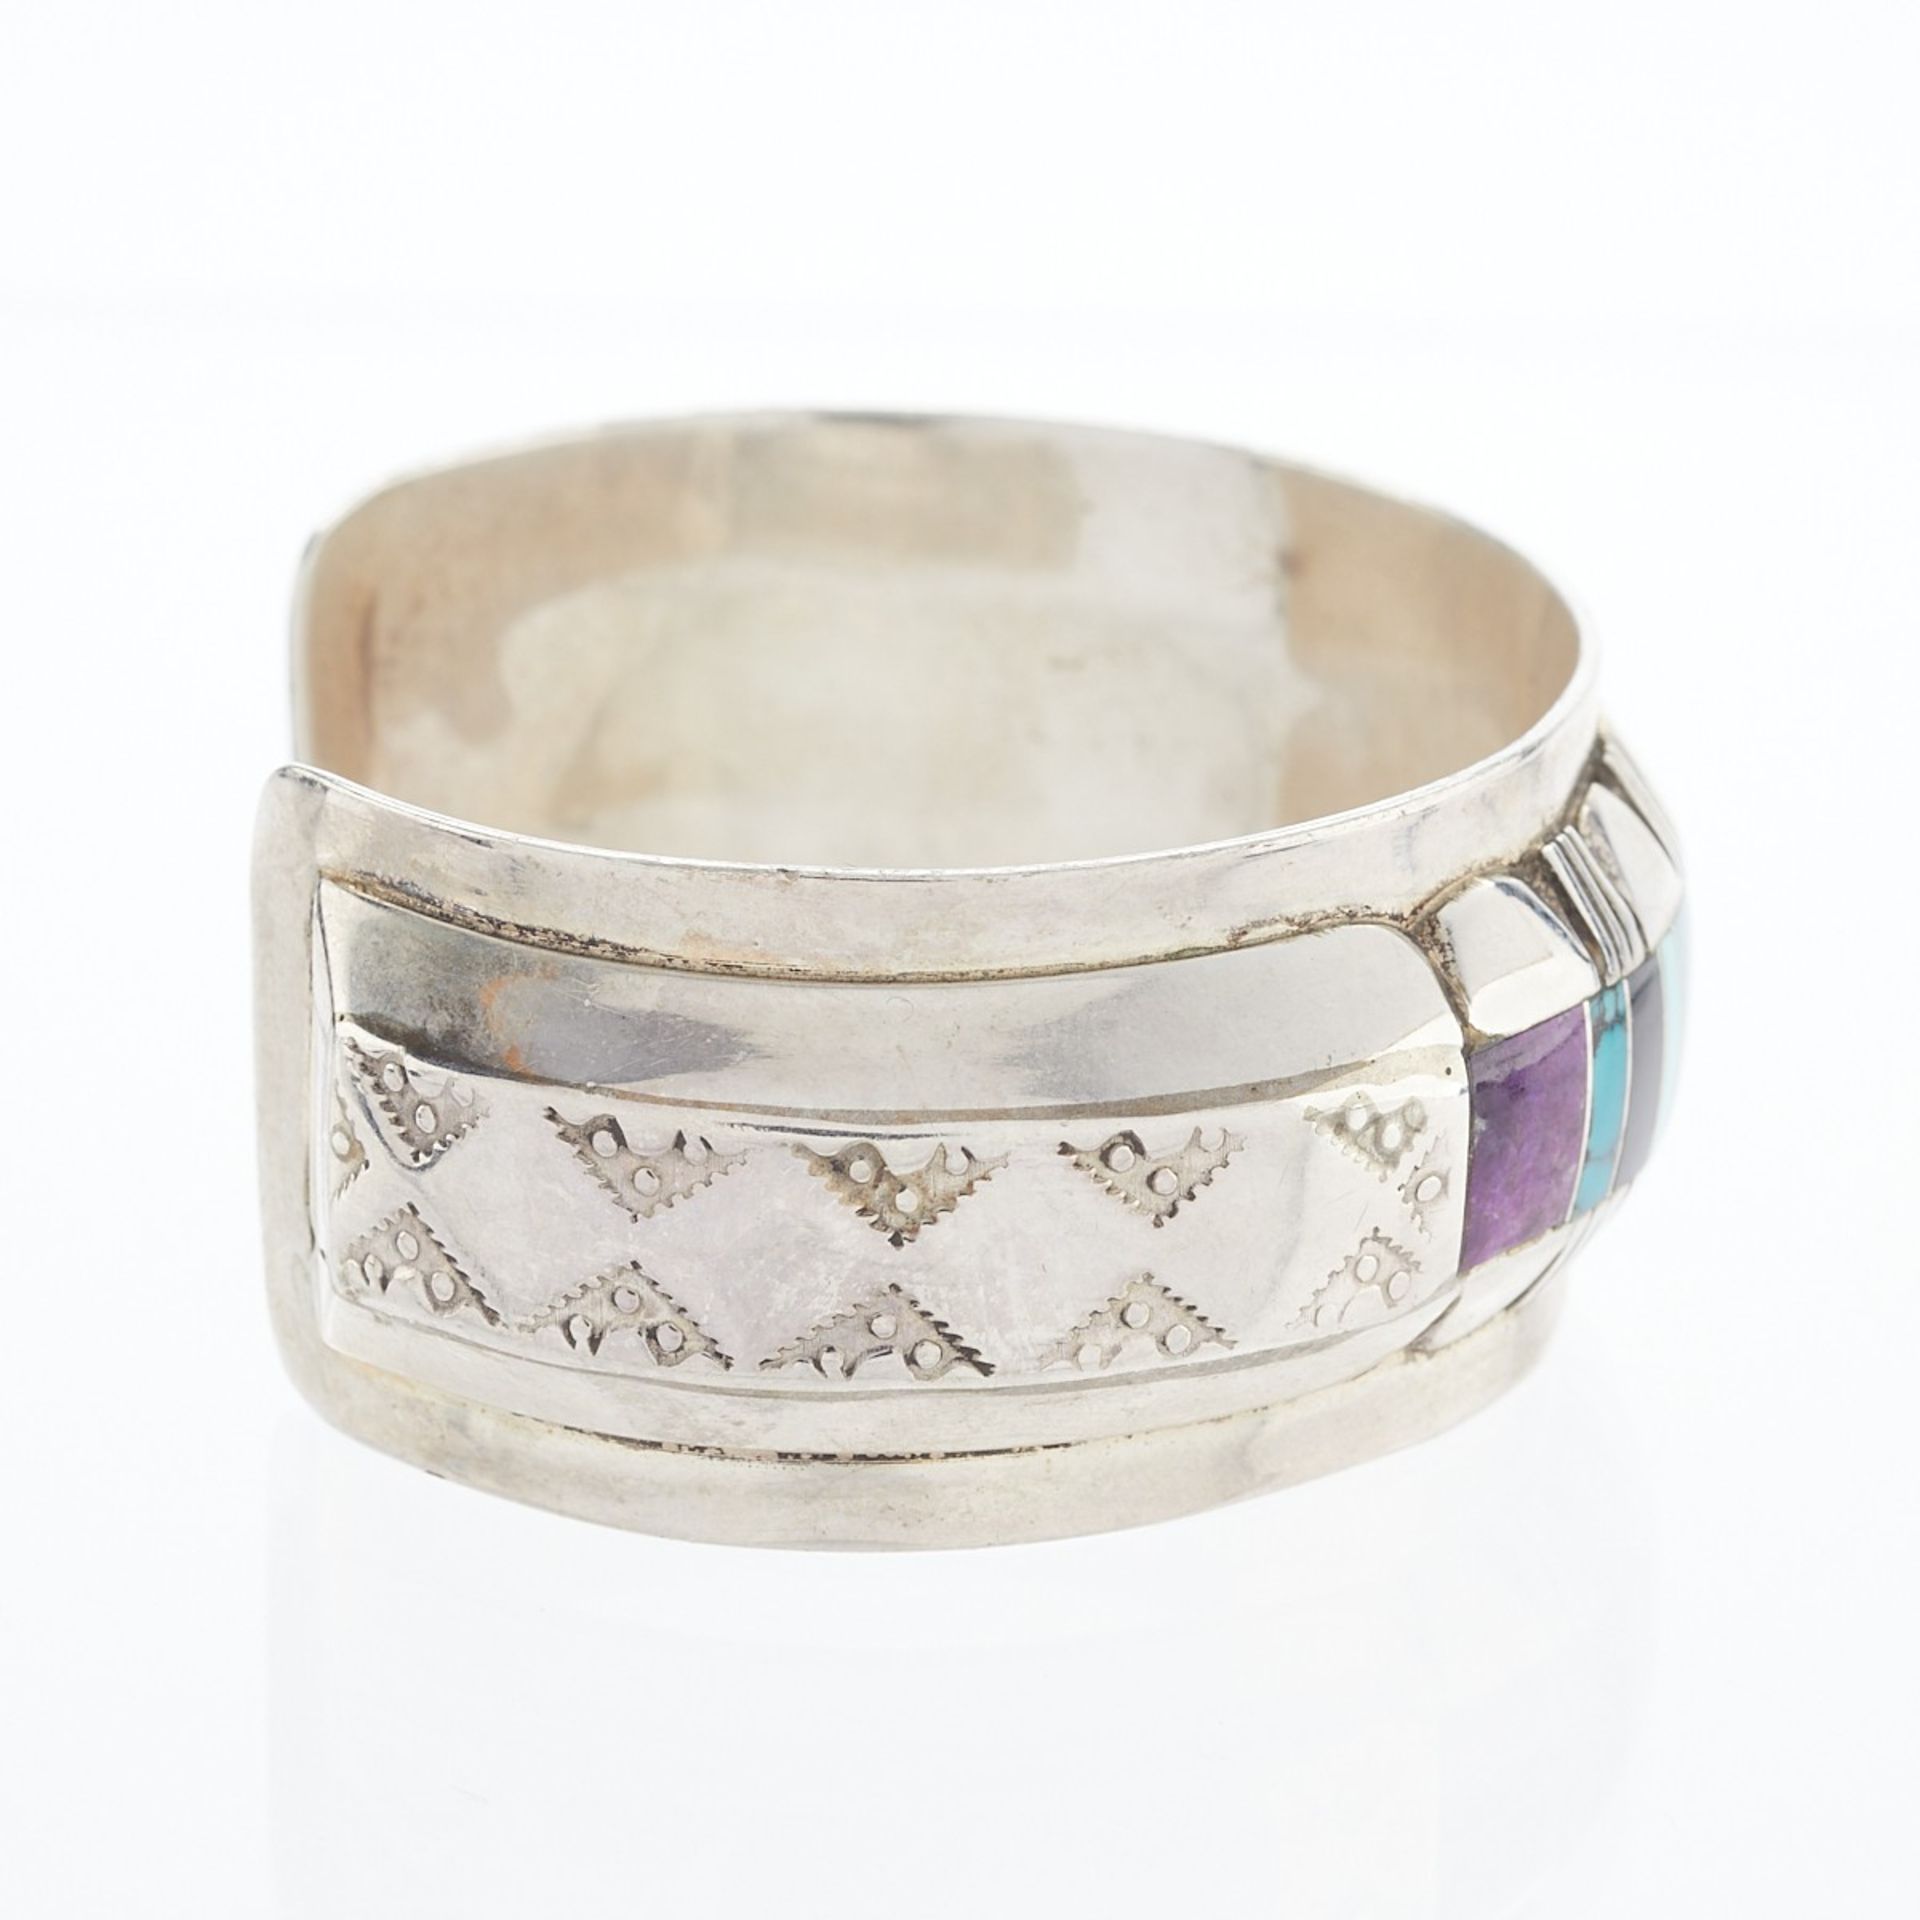 Southwest Sterling & Turquoise Cuff Bracelet - Image 5 of 9